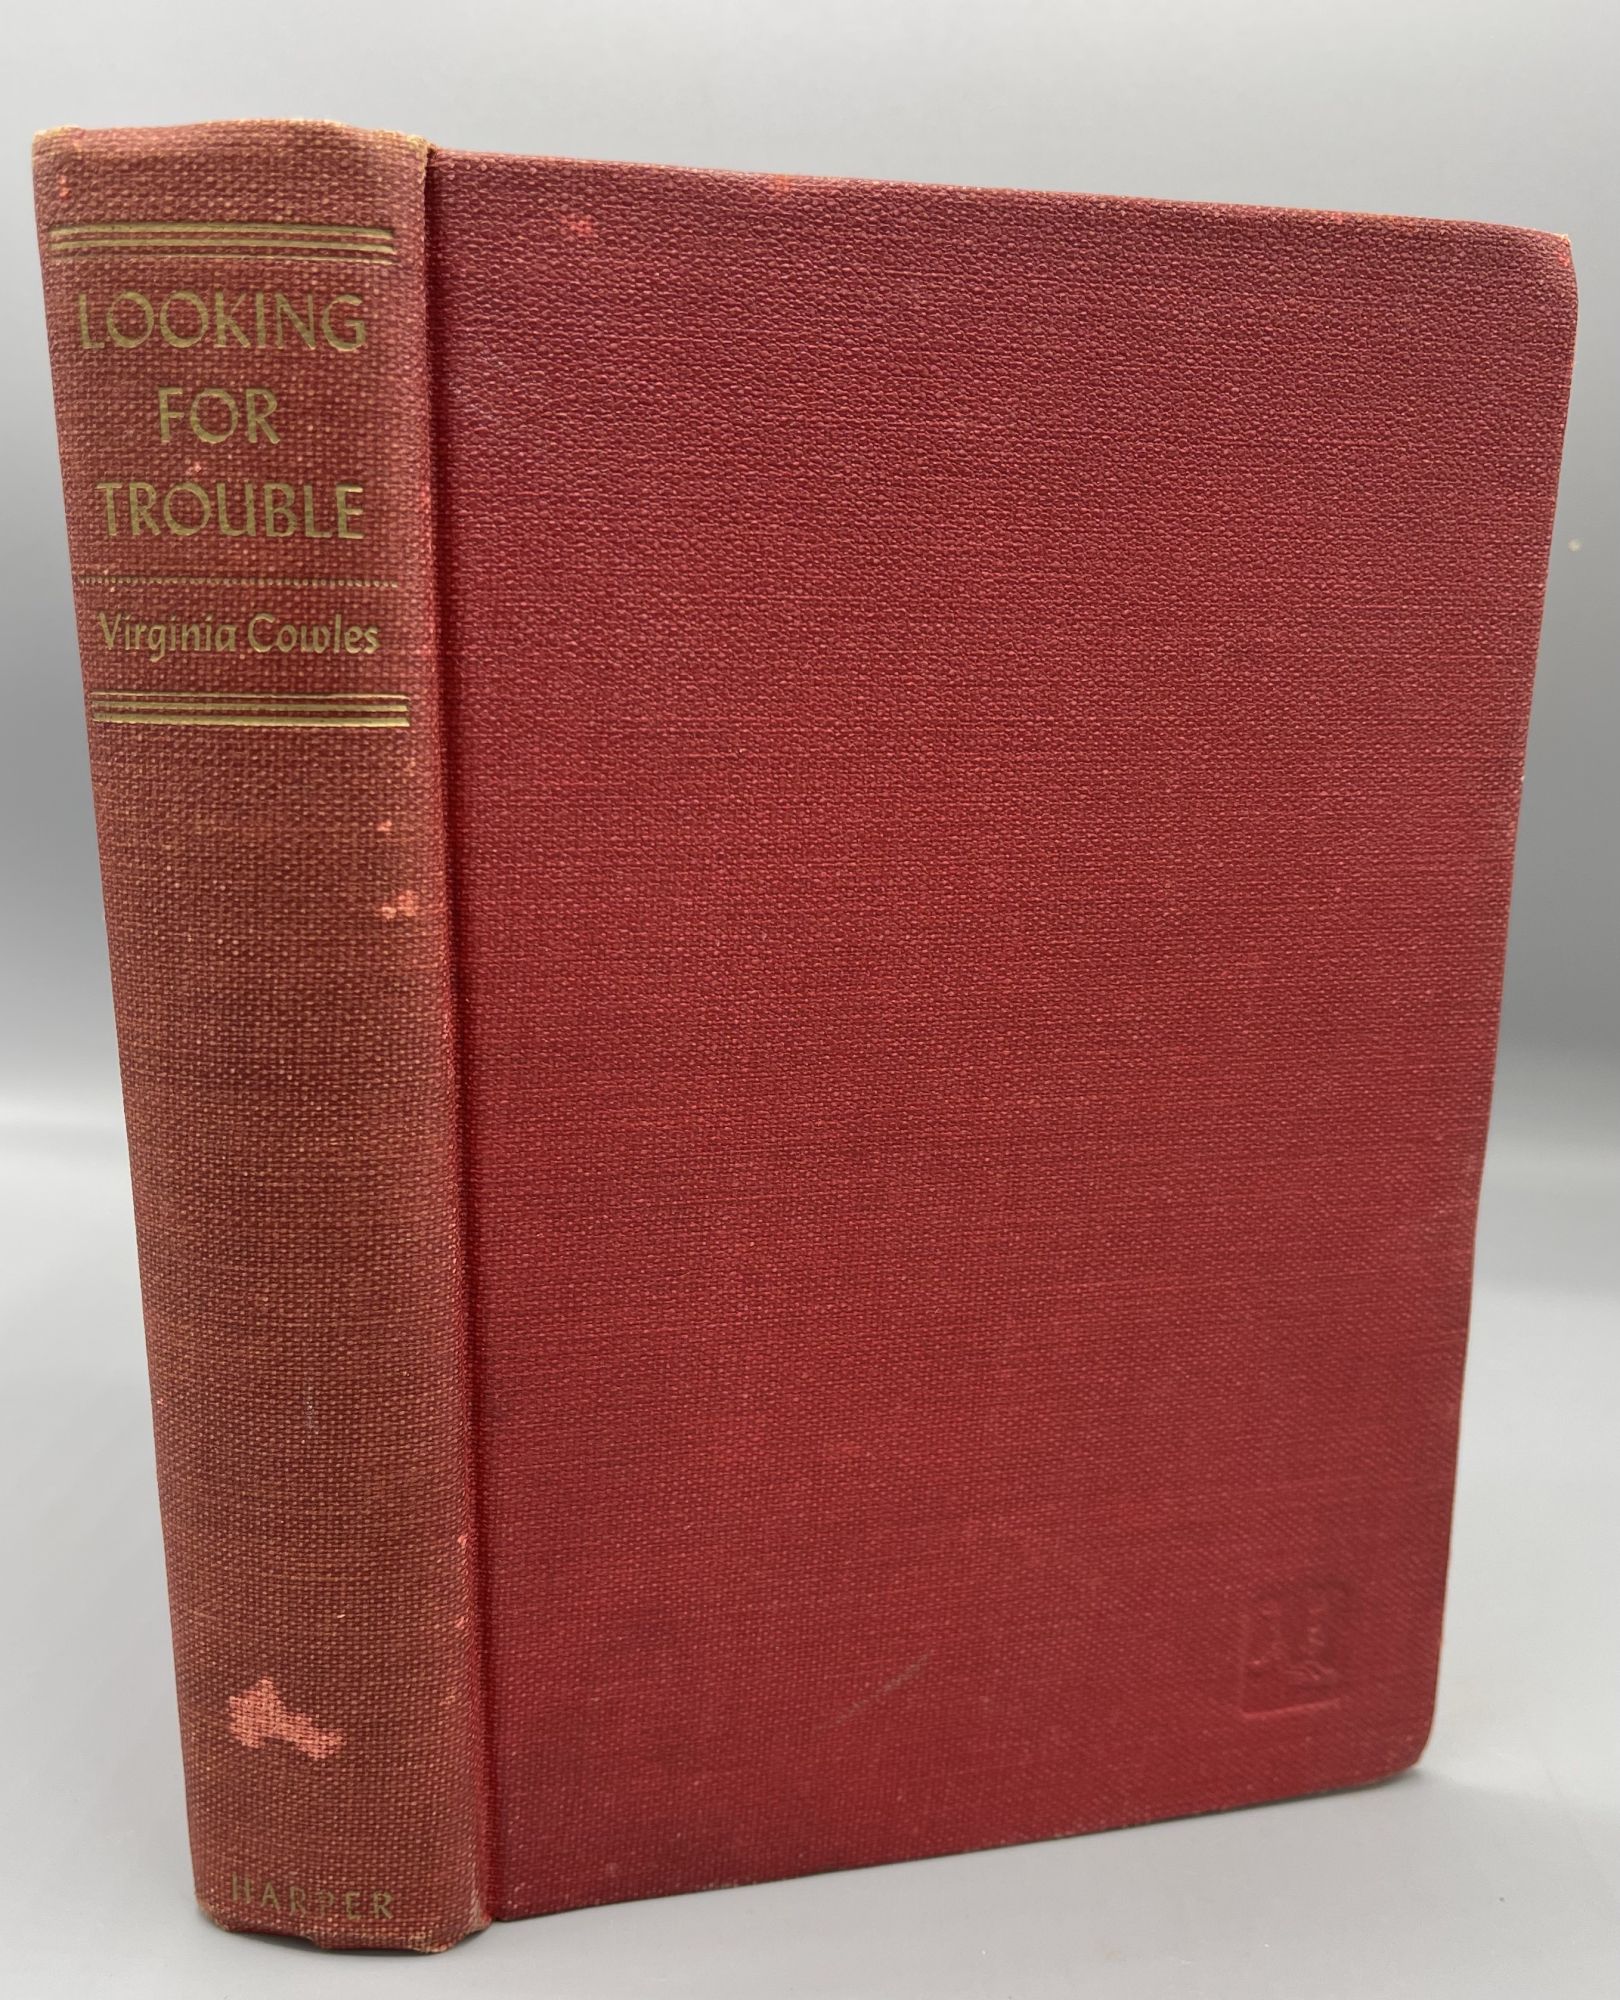 Looking for Trouble Cowles, Virginia [ ] [Hardcover] Hardcover, no dust jacket, red cloth, 440 pp plus index. Third edition. Memoir of life on wartime Europe's frontline by a trailblazing female reporter. Very good with mild discoloration to covers, toning to pages, owner inscription to front endpaper.